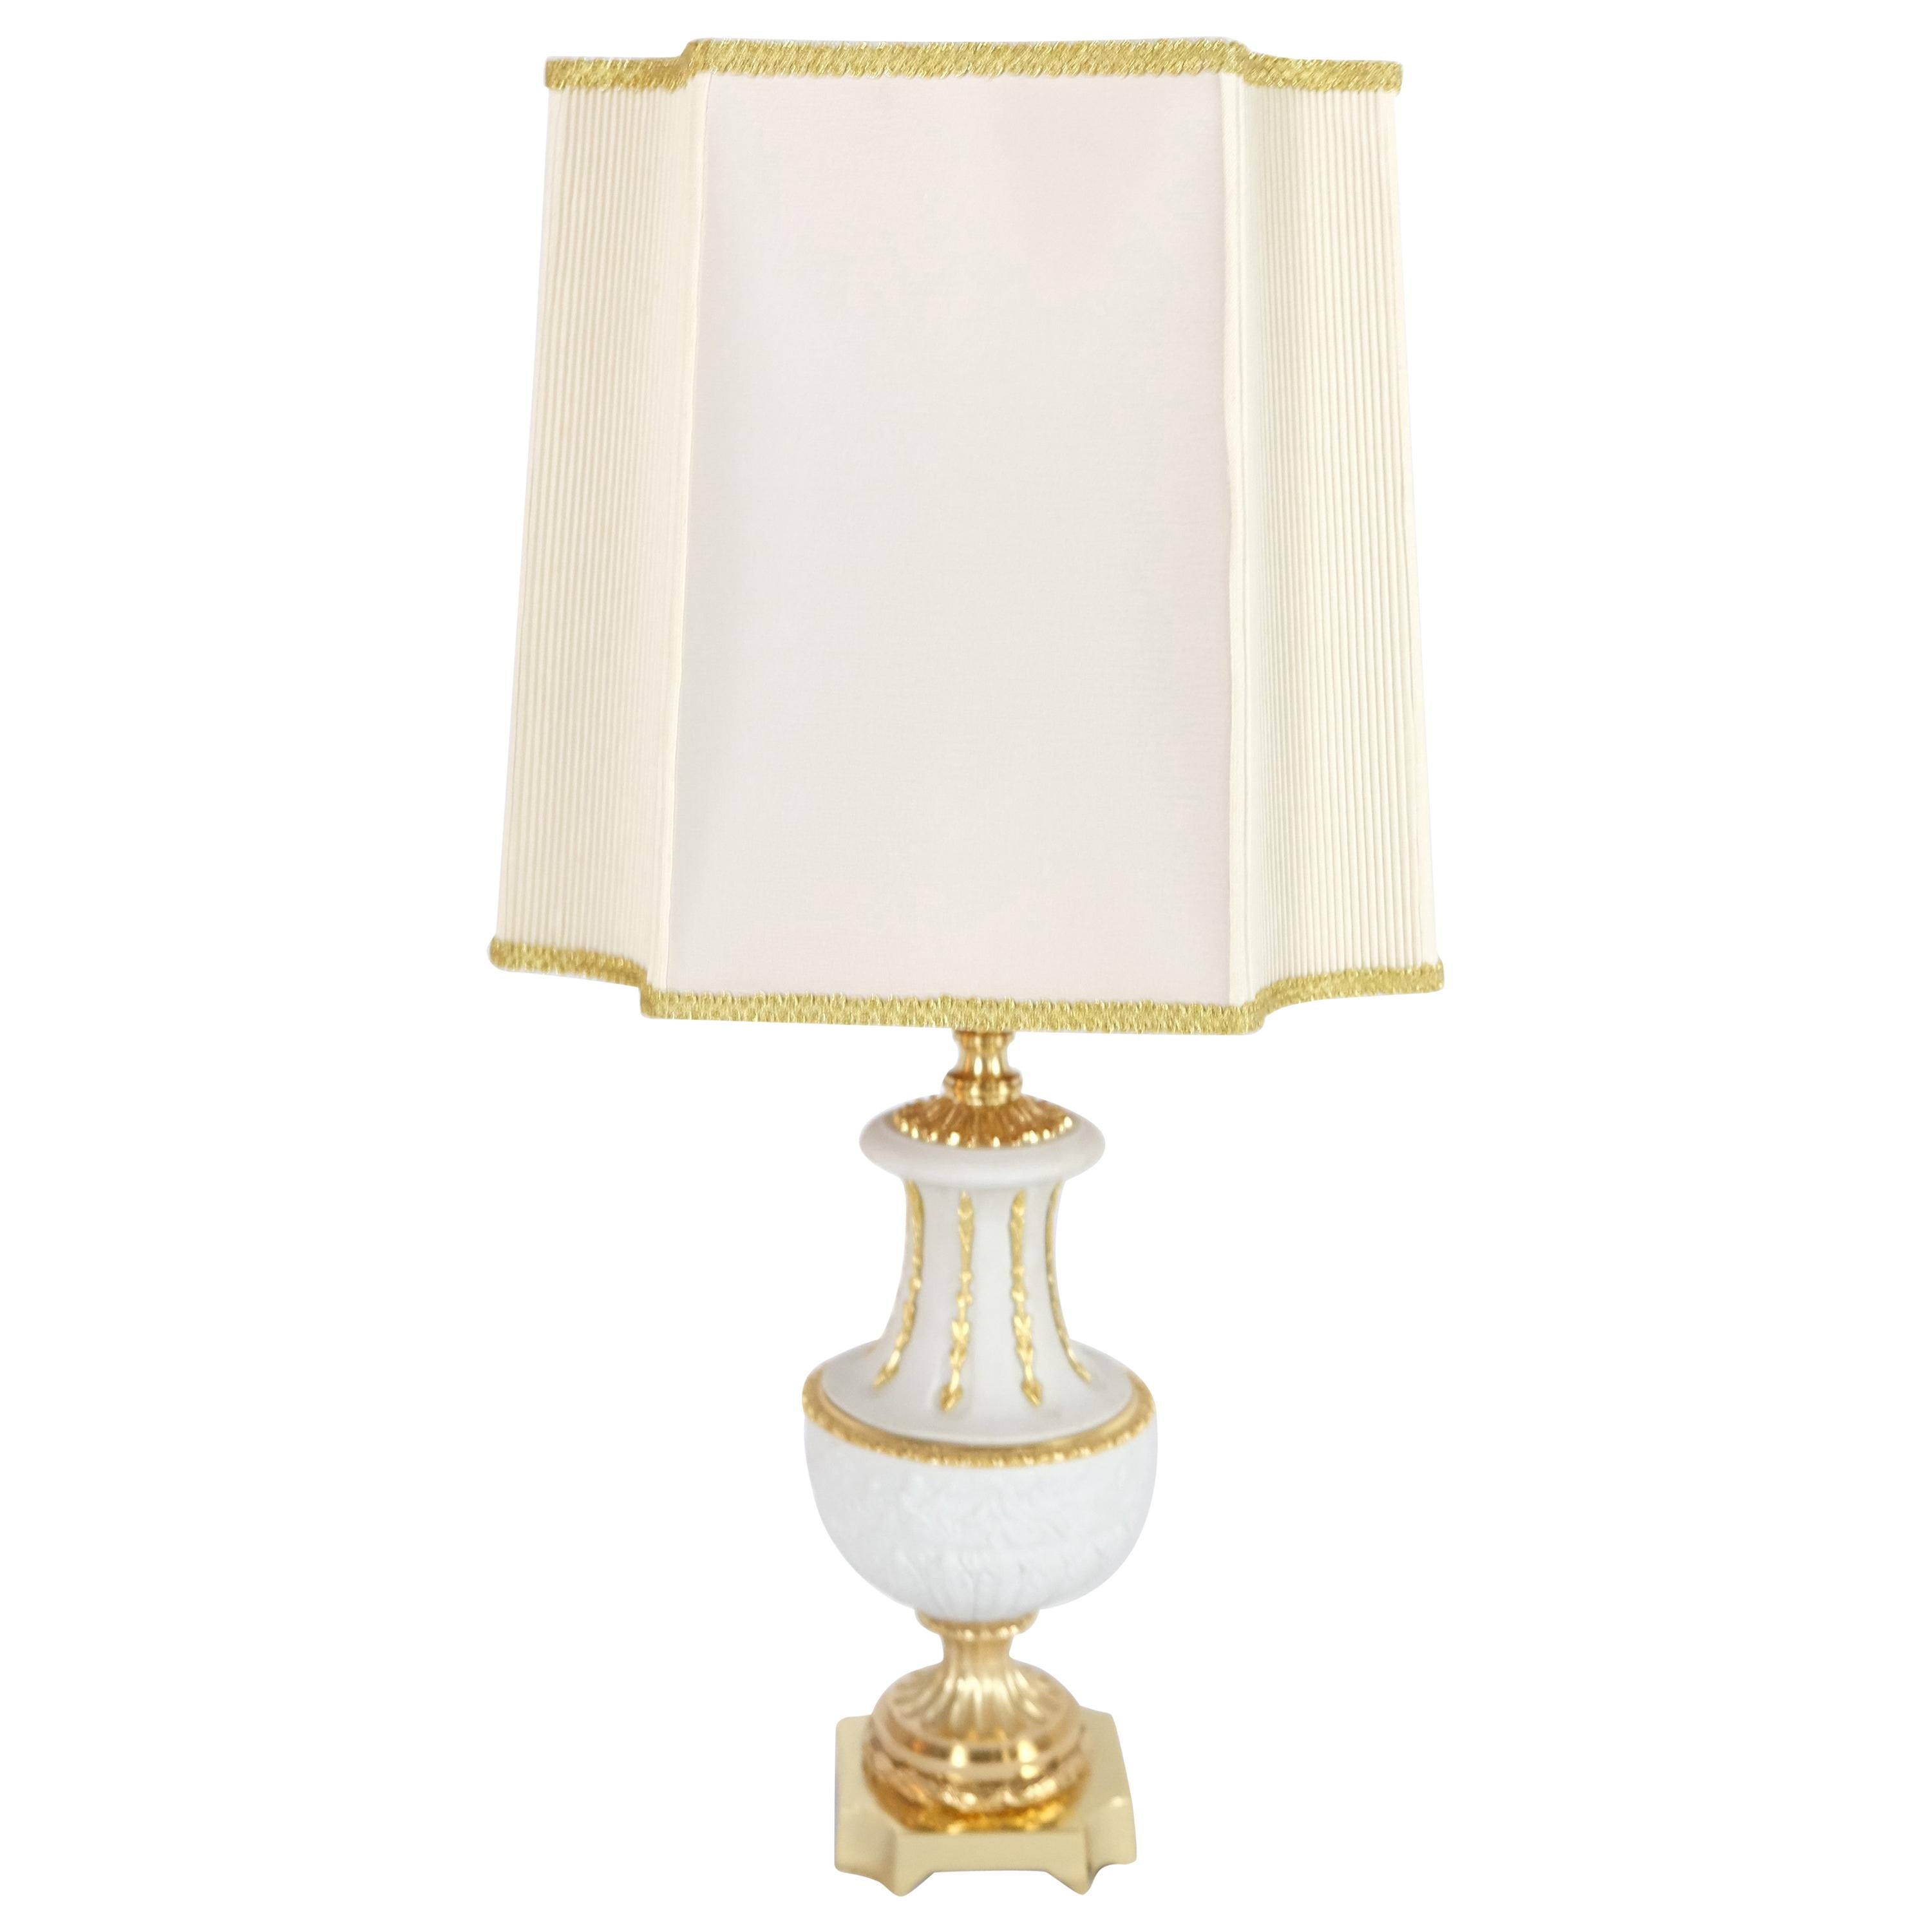 Mangani, Italy Classically Designed Porcelain Table Lamp For Sale